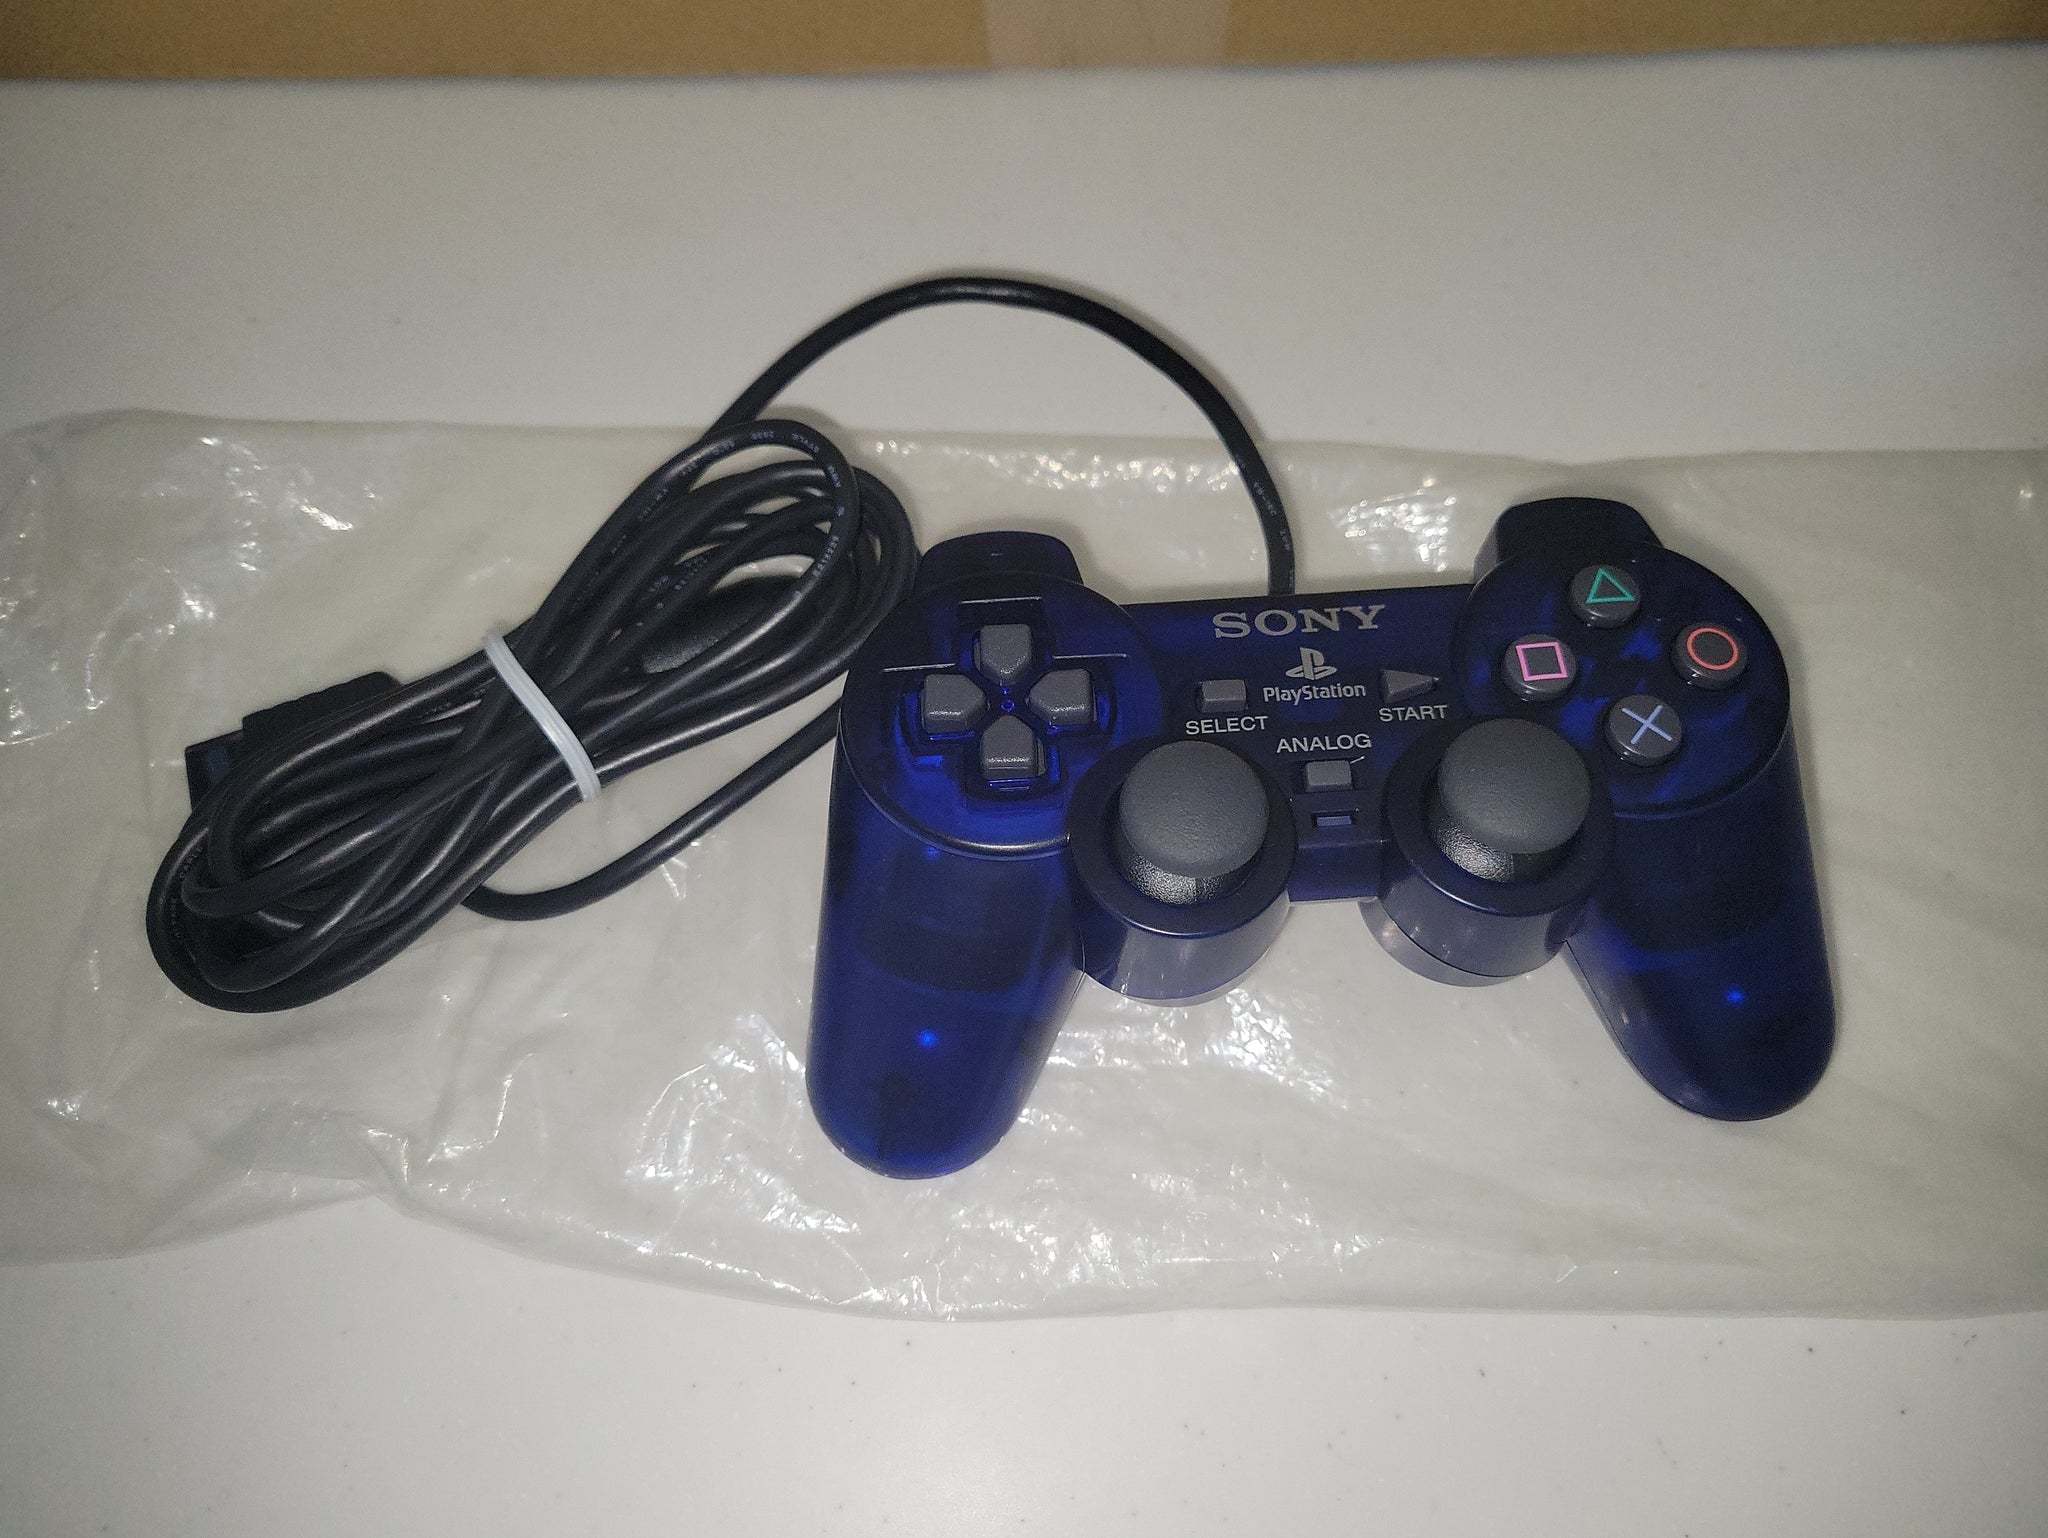 SCPH-37000 Ocean Blue Console PlayStation 2 - Sony playstation 2 